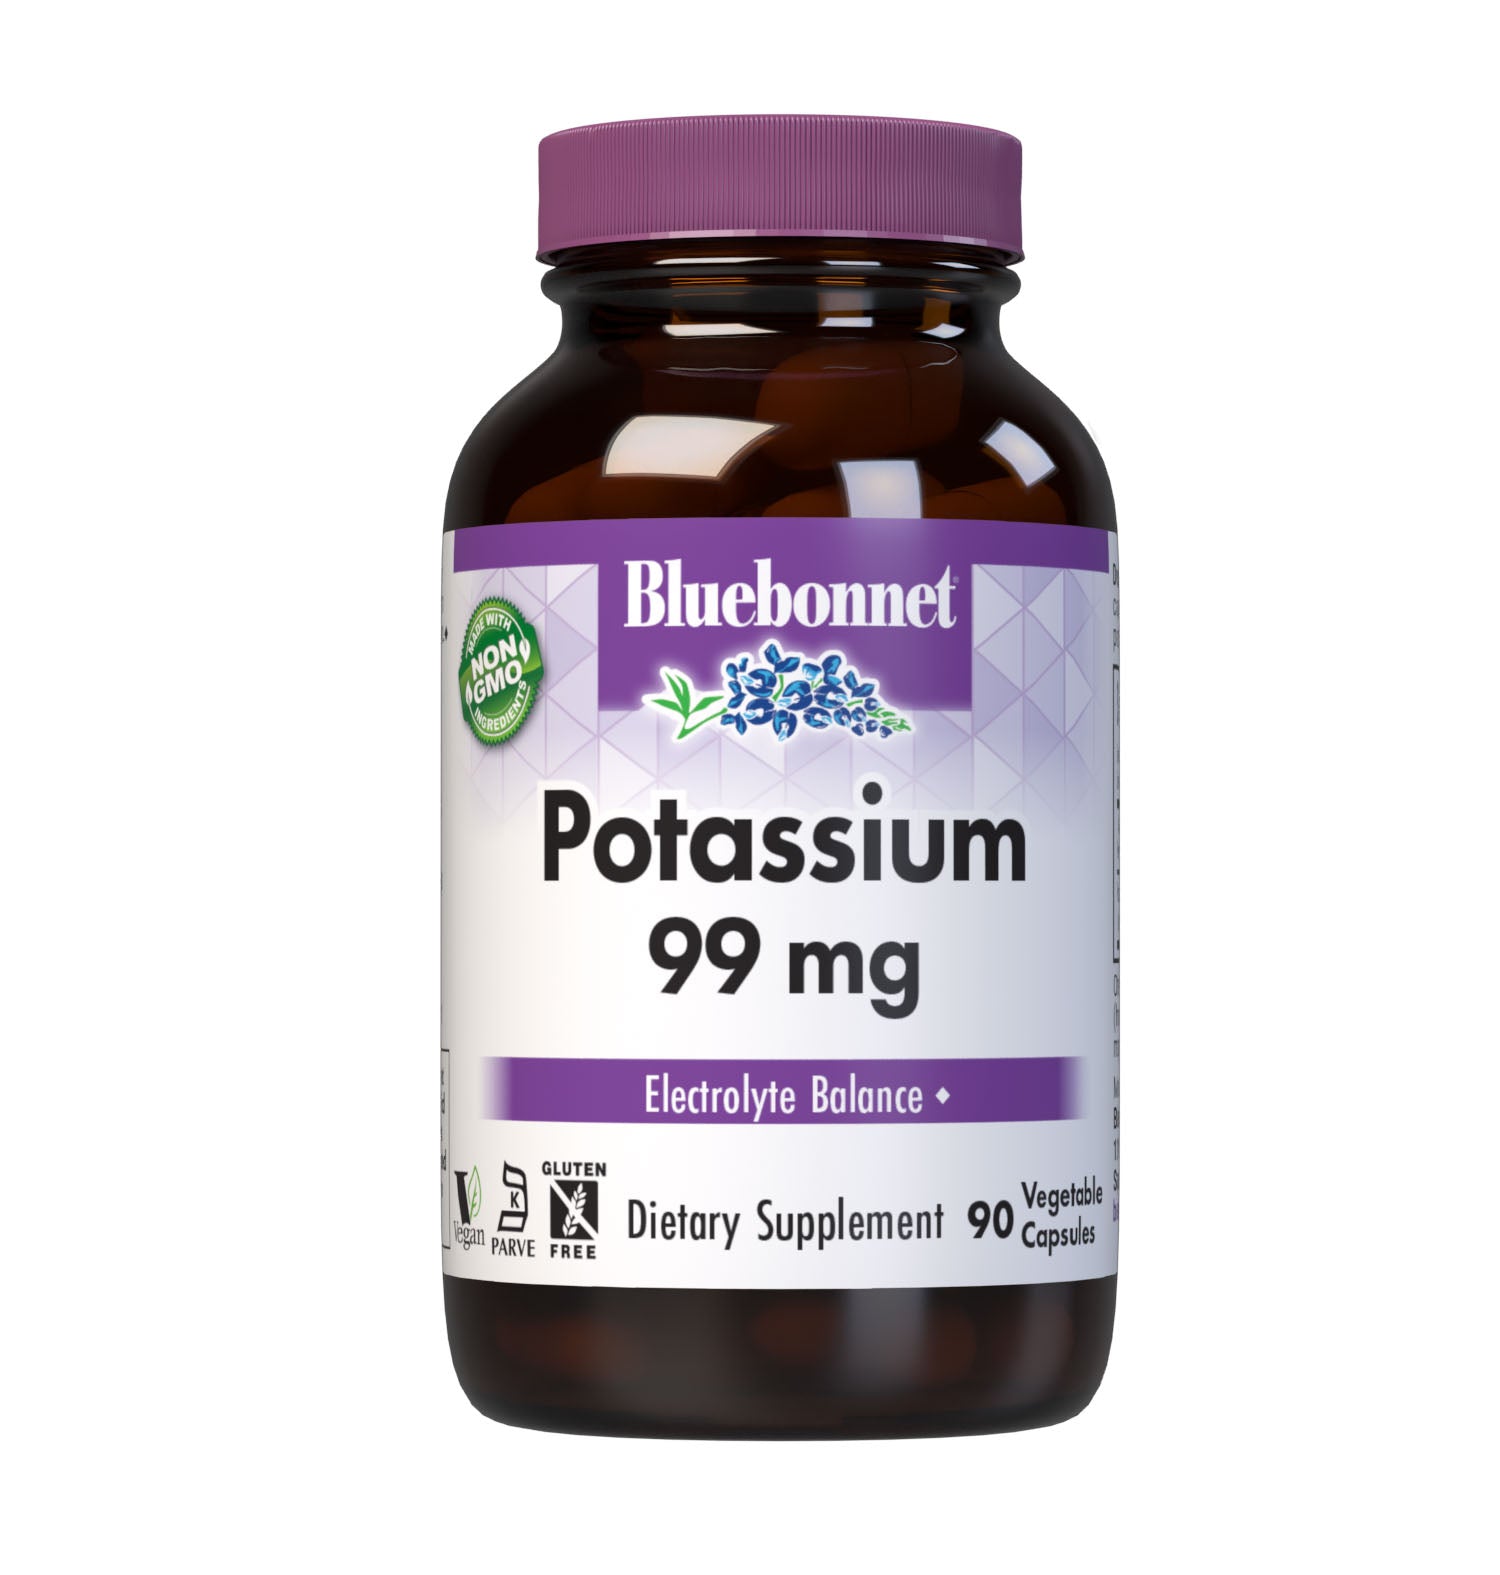 Bluebonnet's Potassium 99 mg 90 Vegetable Capsules are formulated with potassium from reacted potassium aspartate. Potassium is an essential mineral required to support electrolyte balance.  #size_90 count